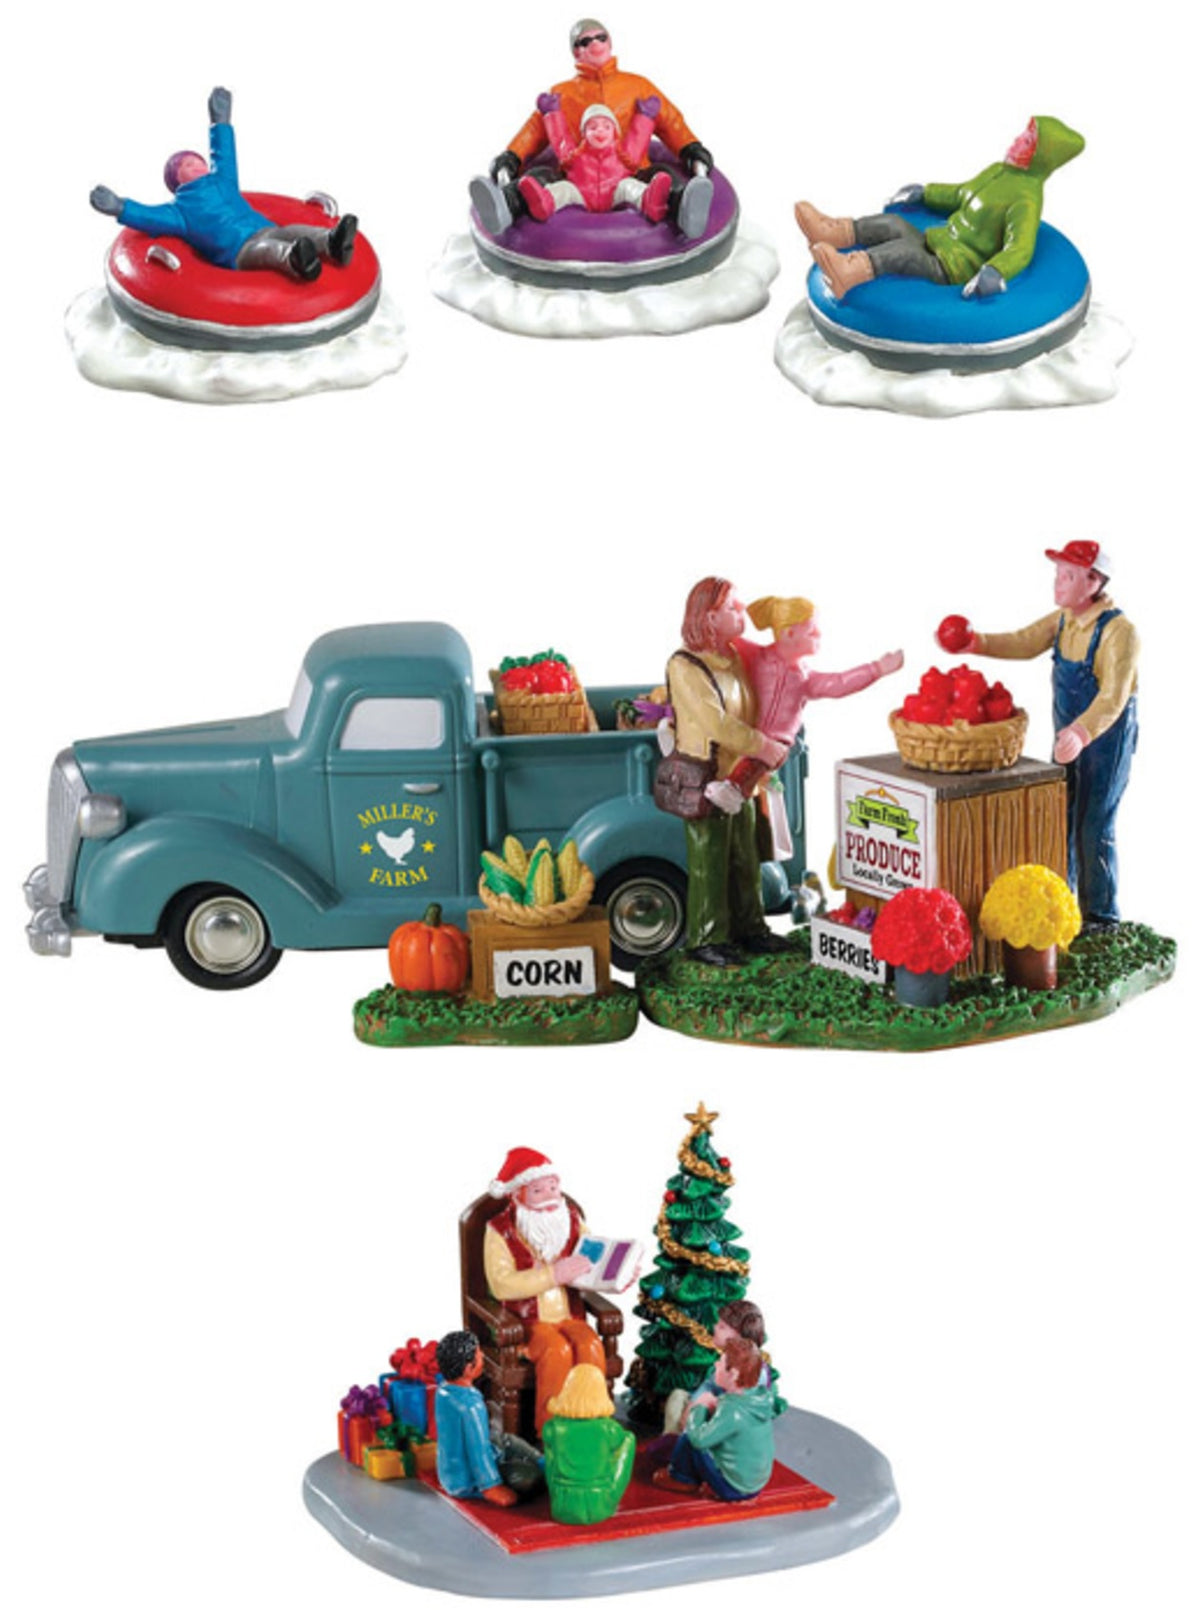 Lemax A3183 Assorted Christmas Village People, Multicolored